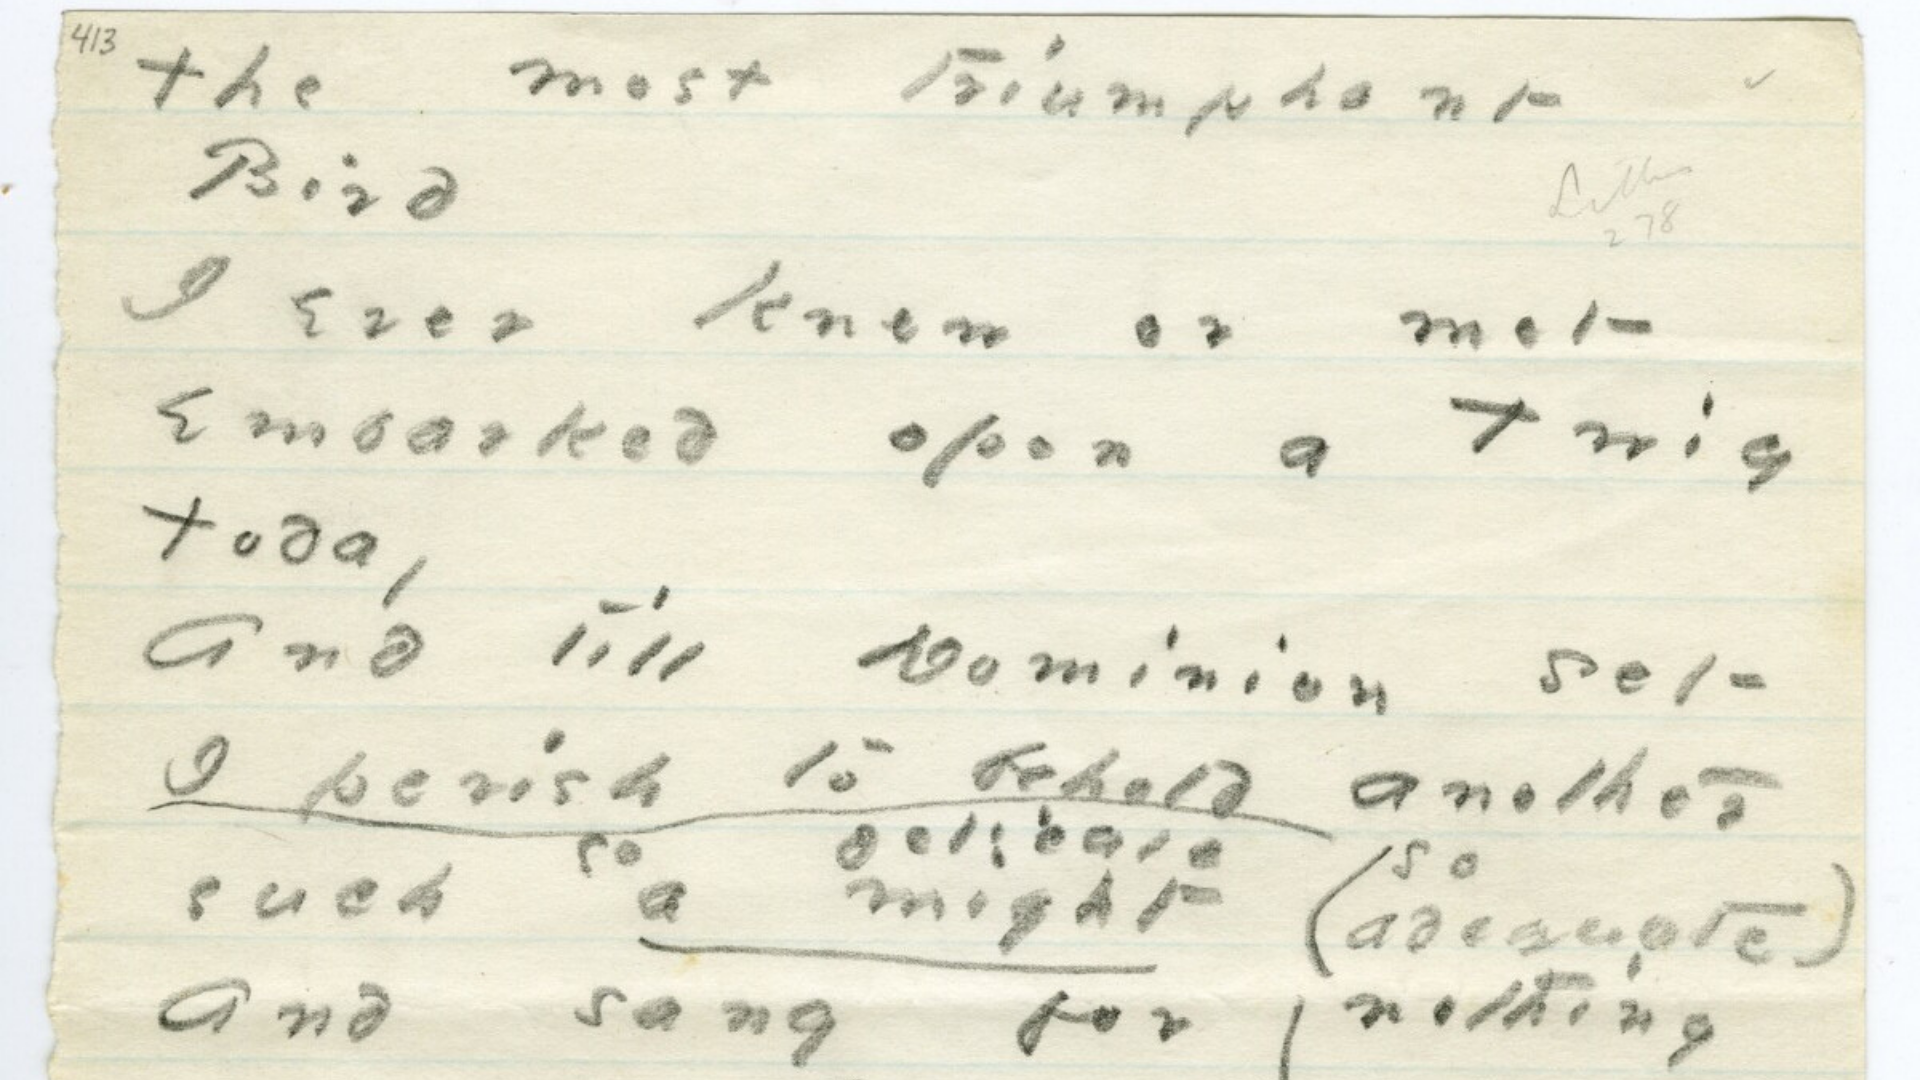 Detail of The most triumphant bird, by Emily Dickinson poem number 413  in The Amherst Manuscript. Emily Dickinson Archive